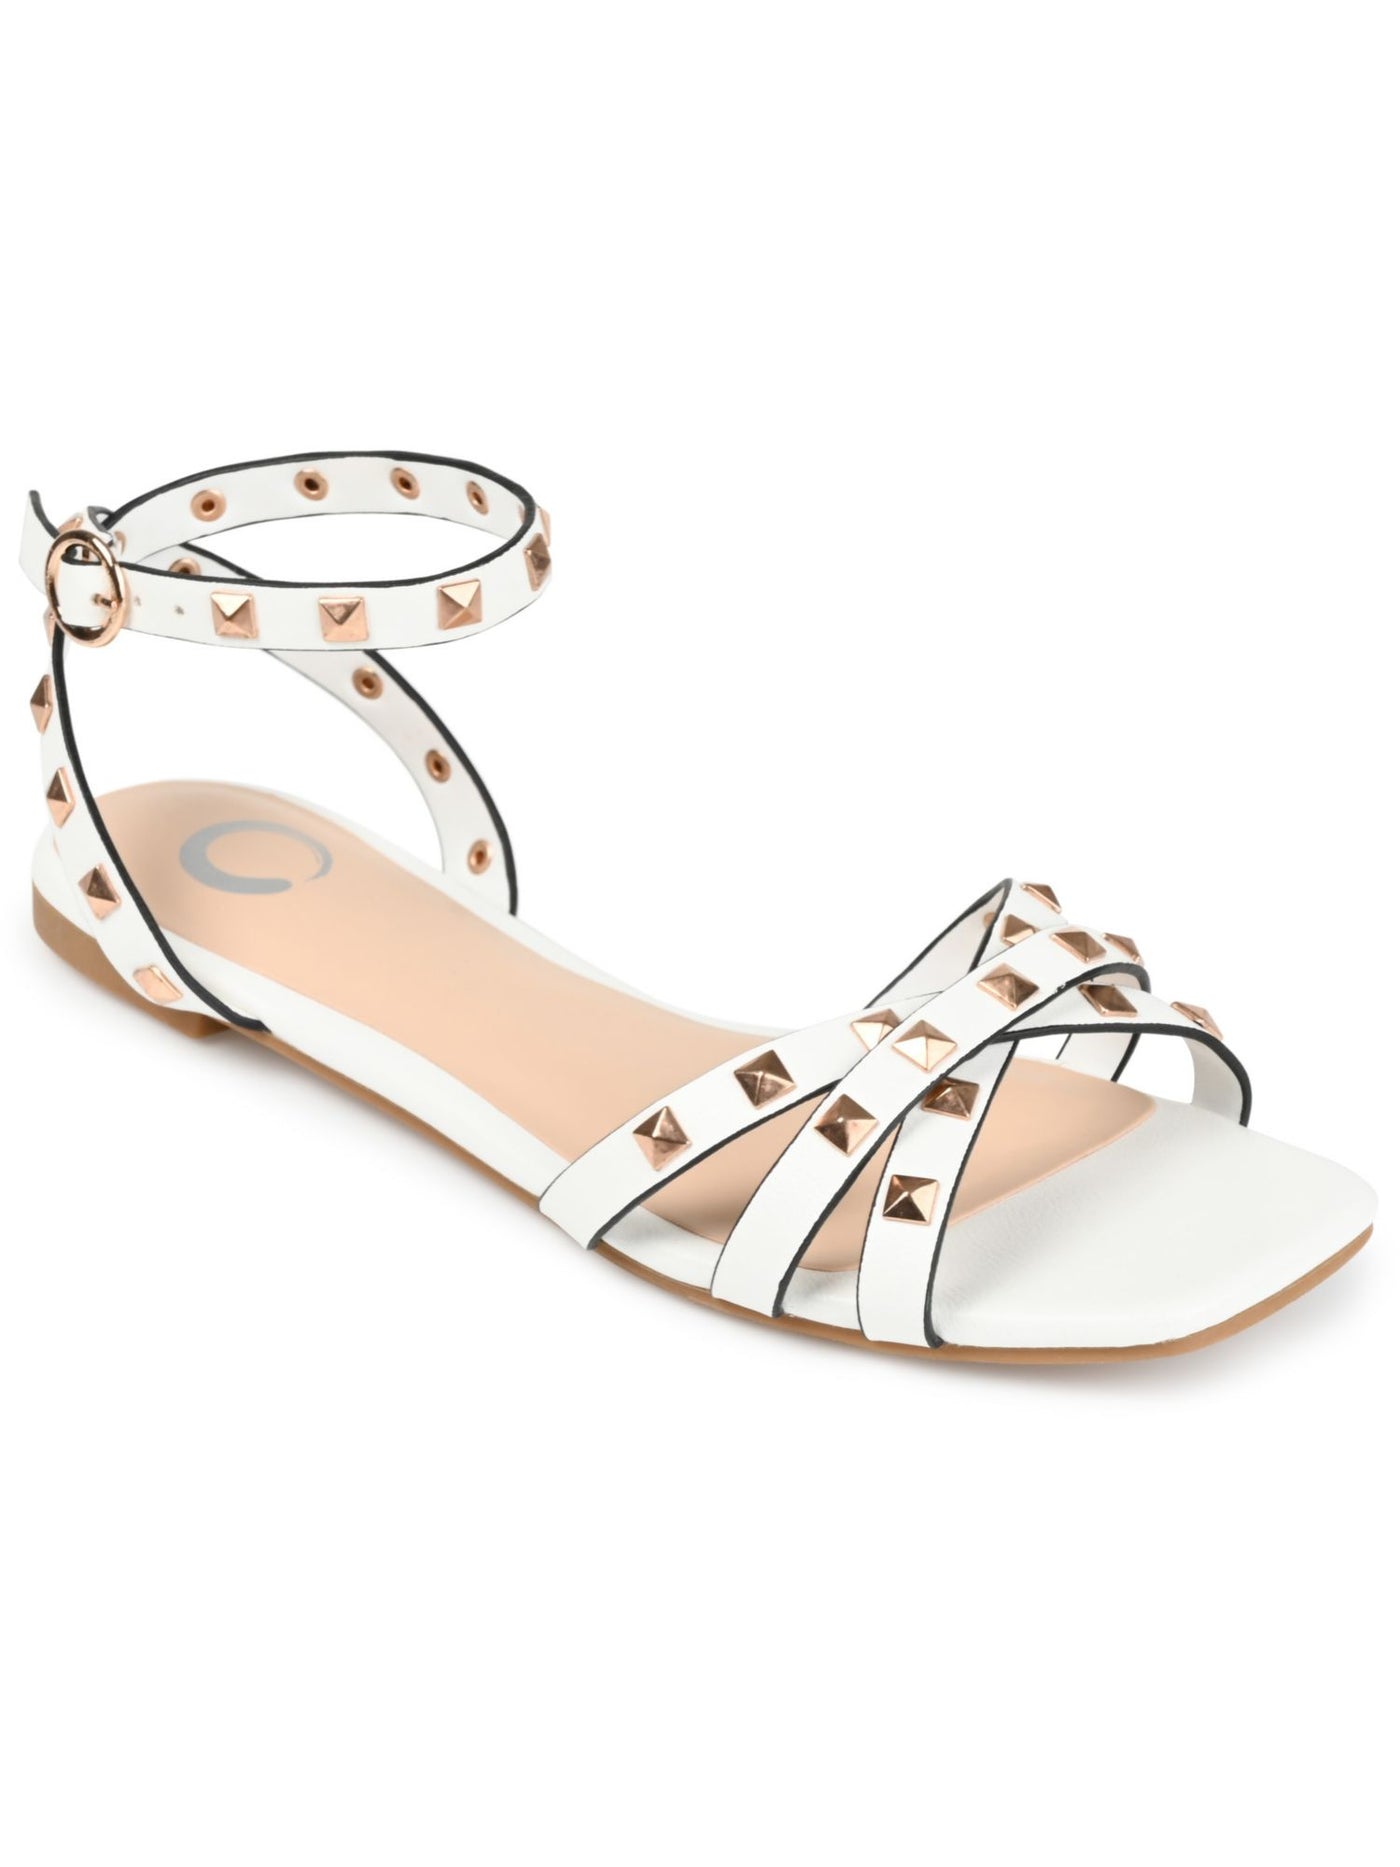 JOURNEE COLLECTION Womens White Studded Strappy Cushioned Adjustable Ankle Strap Zendaya Square Toe Block Heel Buckle Sandals Shoes 10